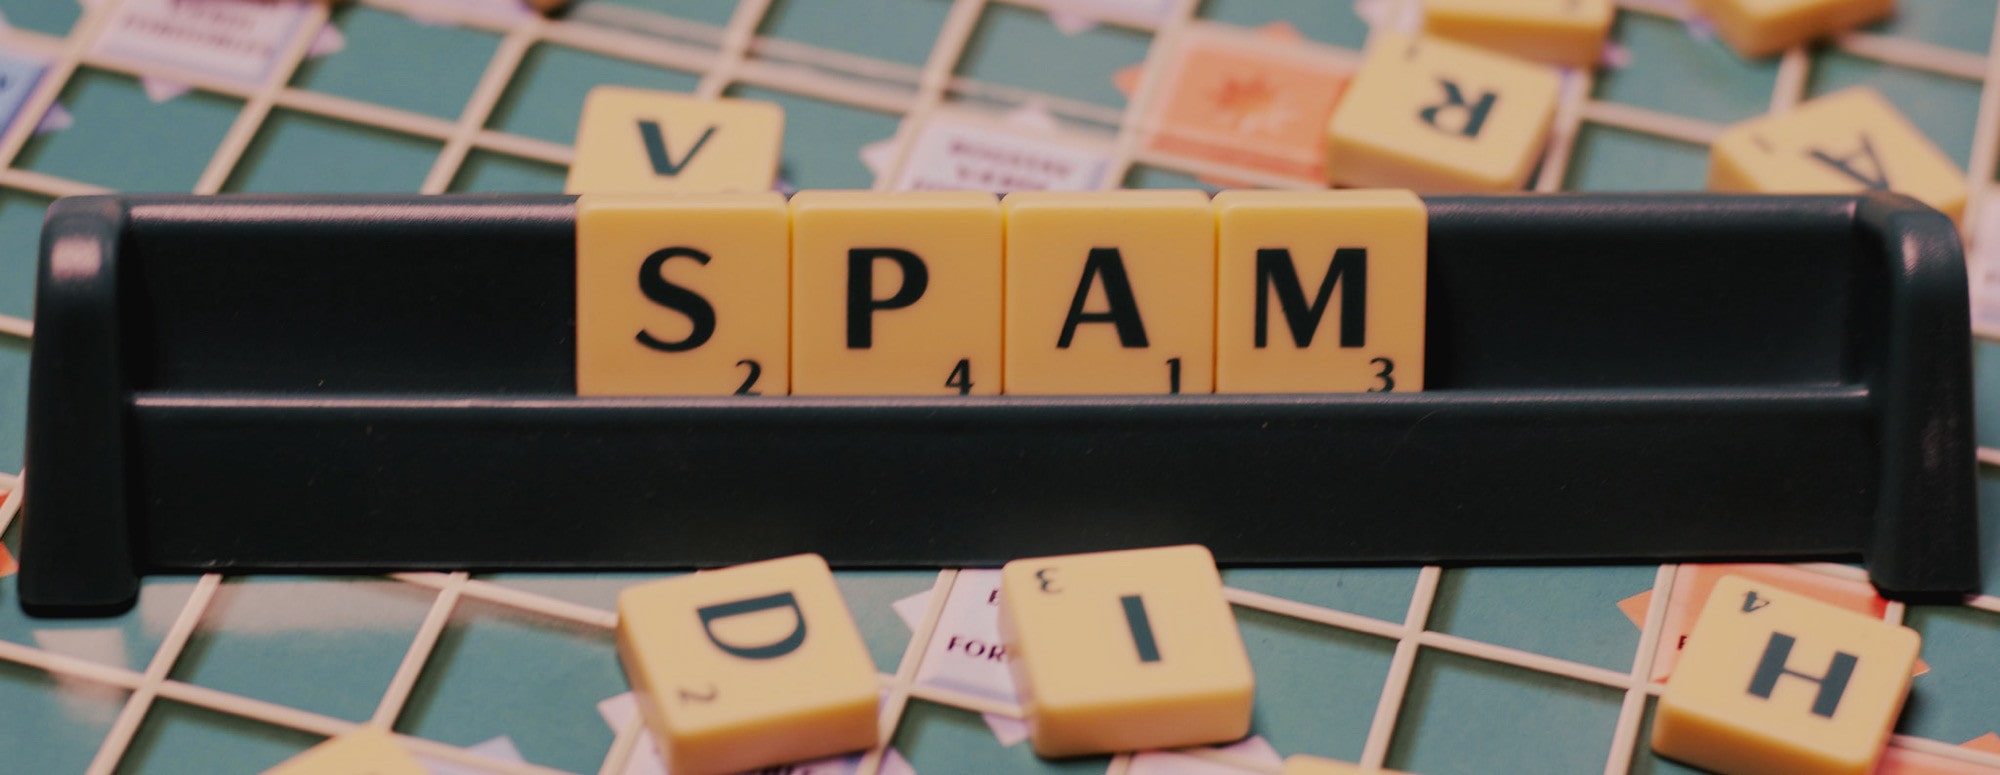 Nobody likes spam. Here's how to stop Apple spam notifications, i.e. marketing notifications.